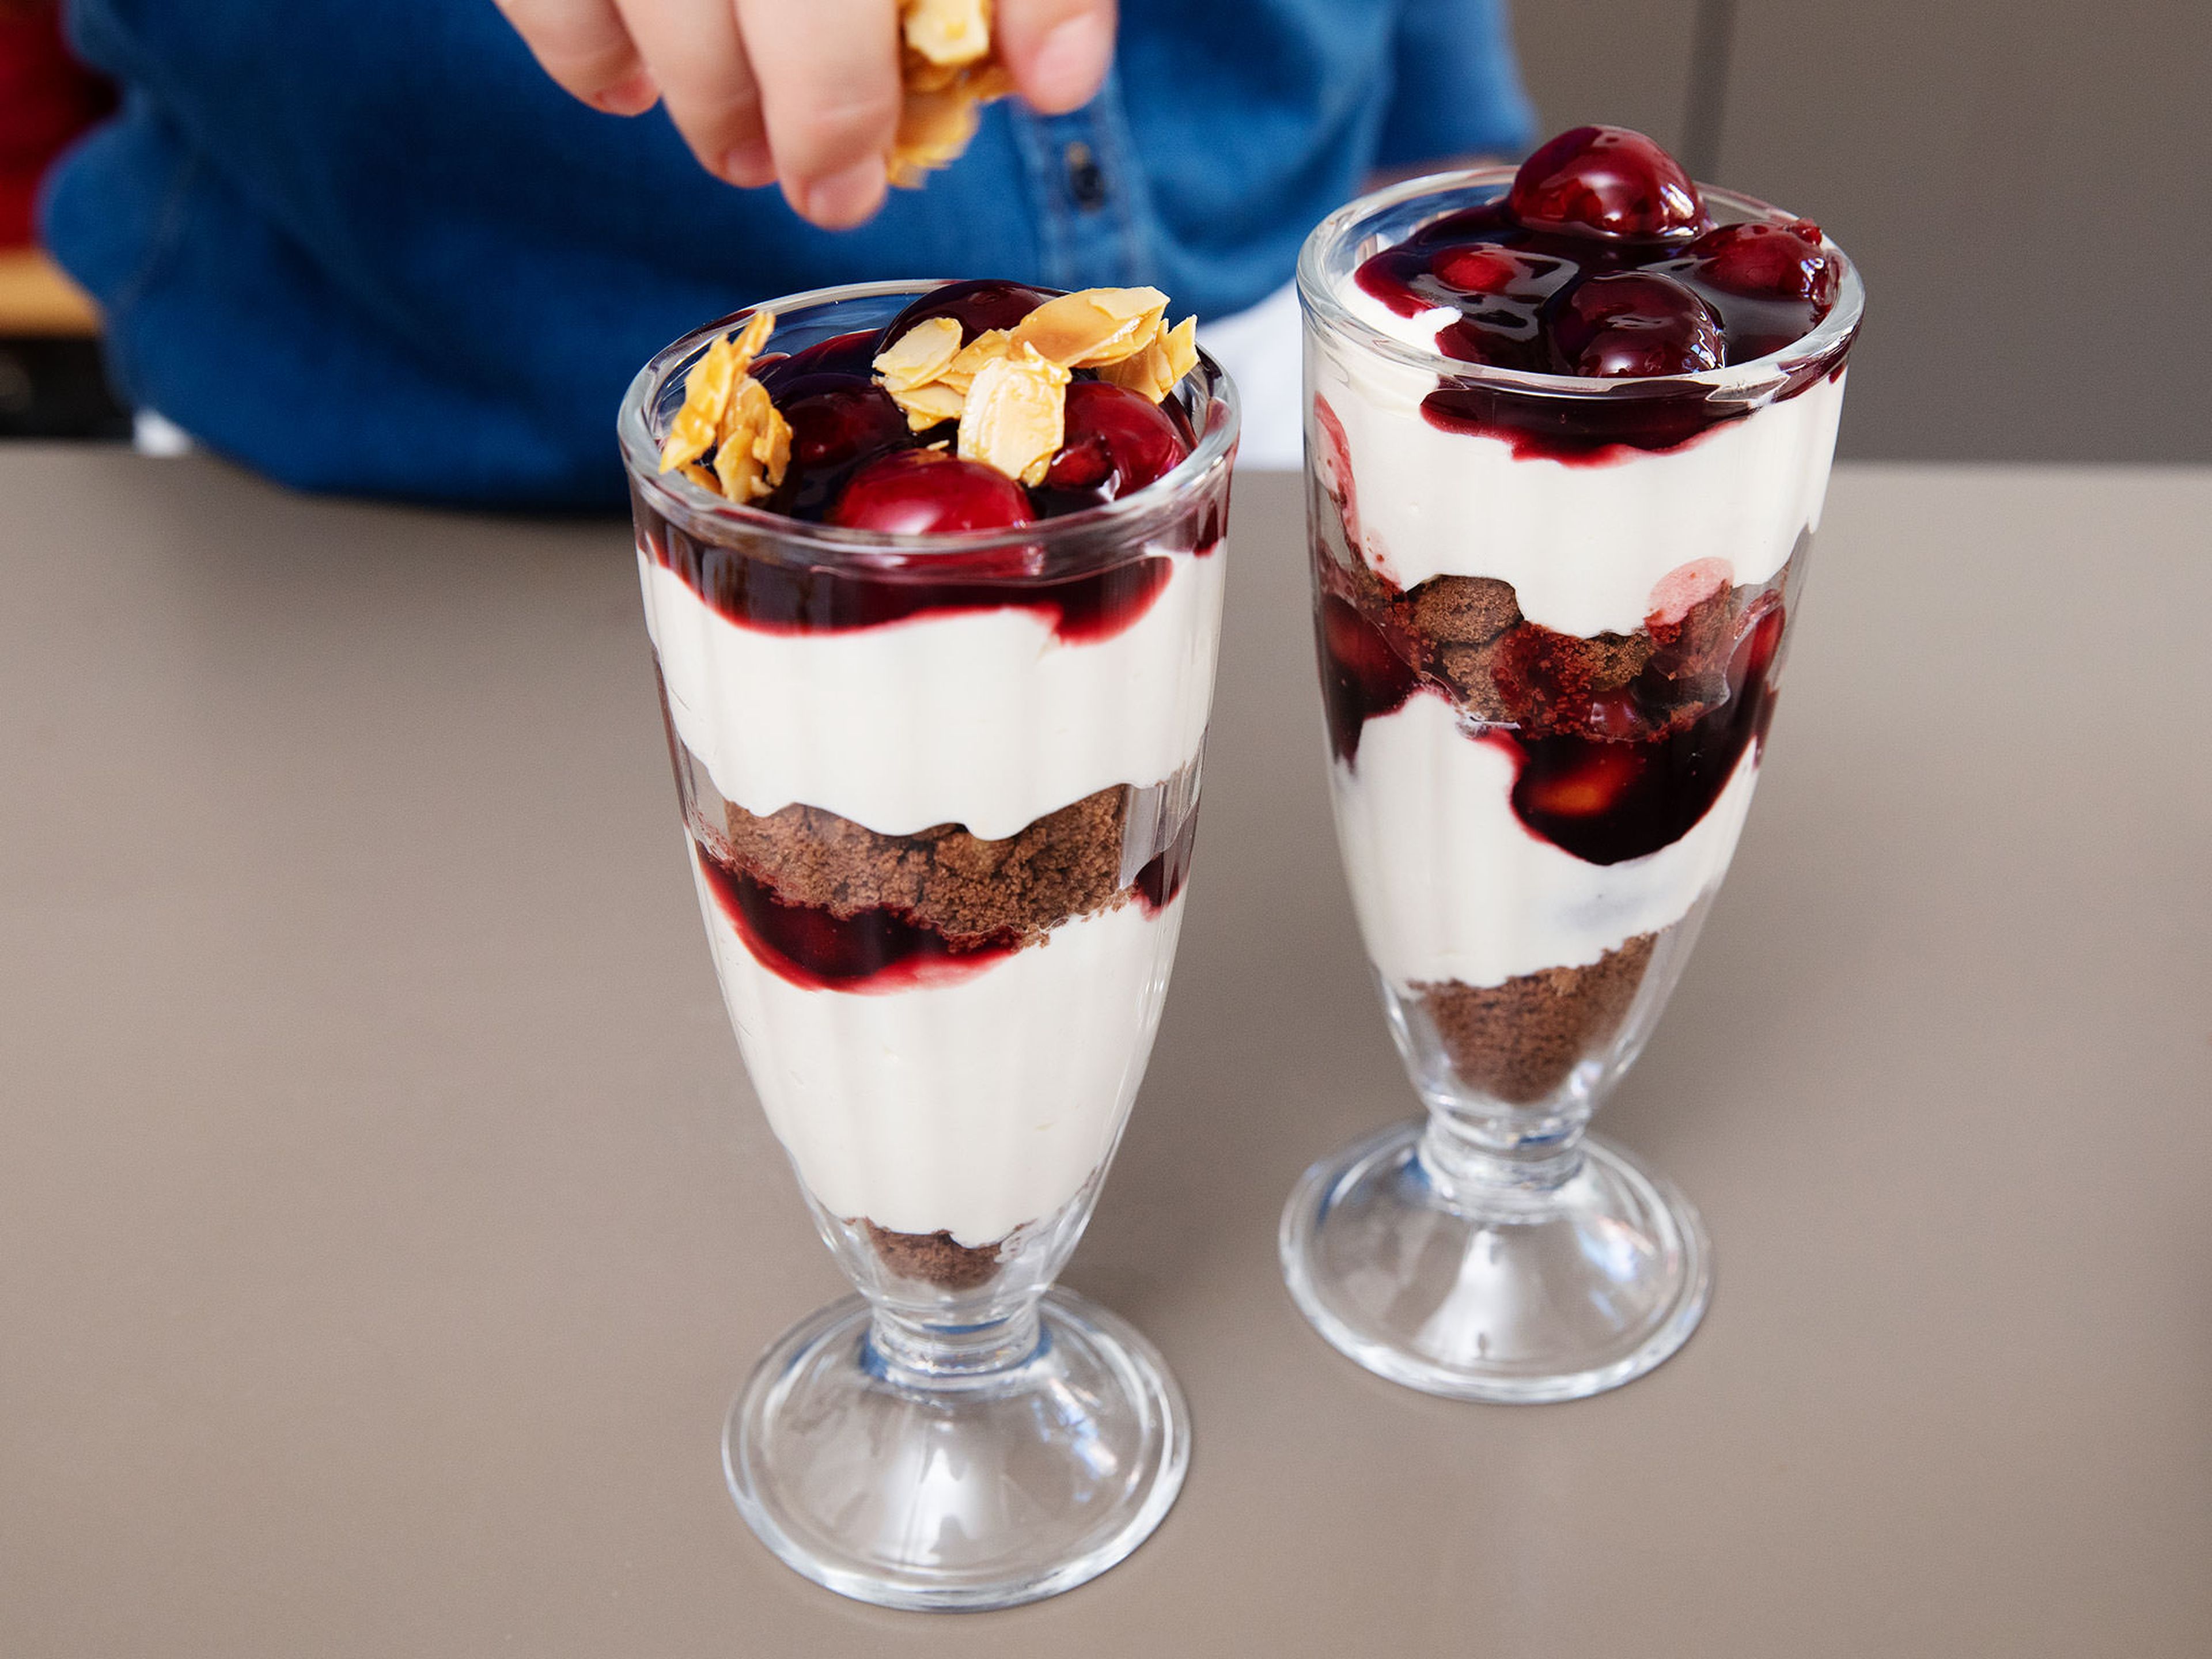 To serve, spoon layers of crumbled chocolate cookies, cream, and cherries to tall glasses. Continue with another set of layers and finish with the caramelized almonds. Enjoy!